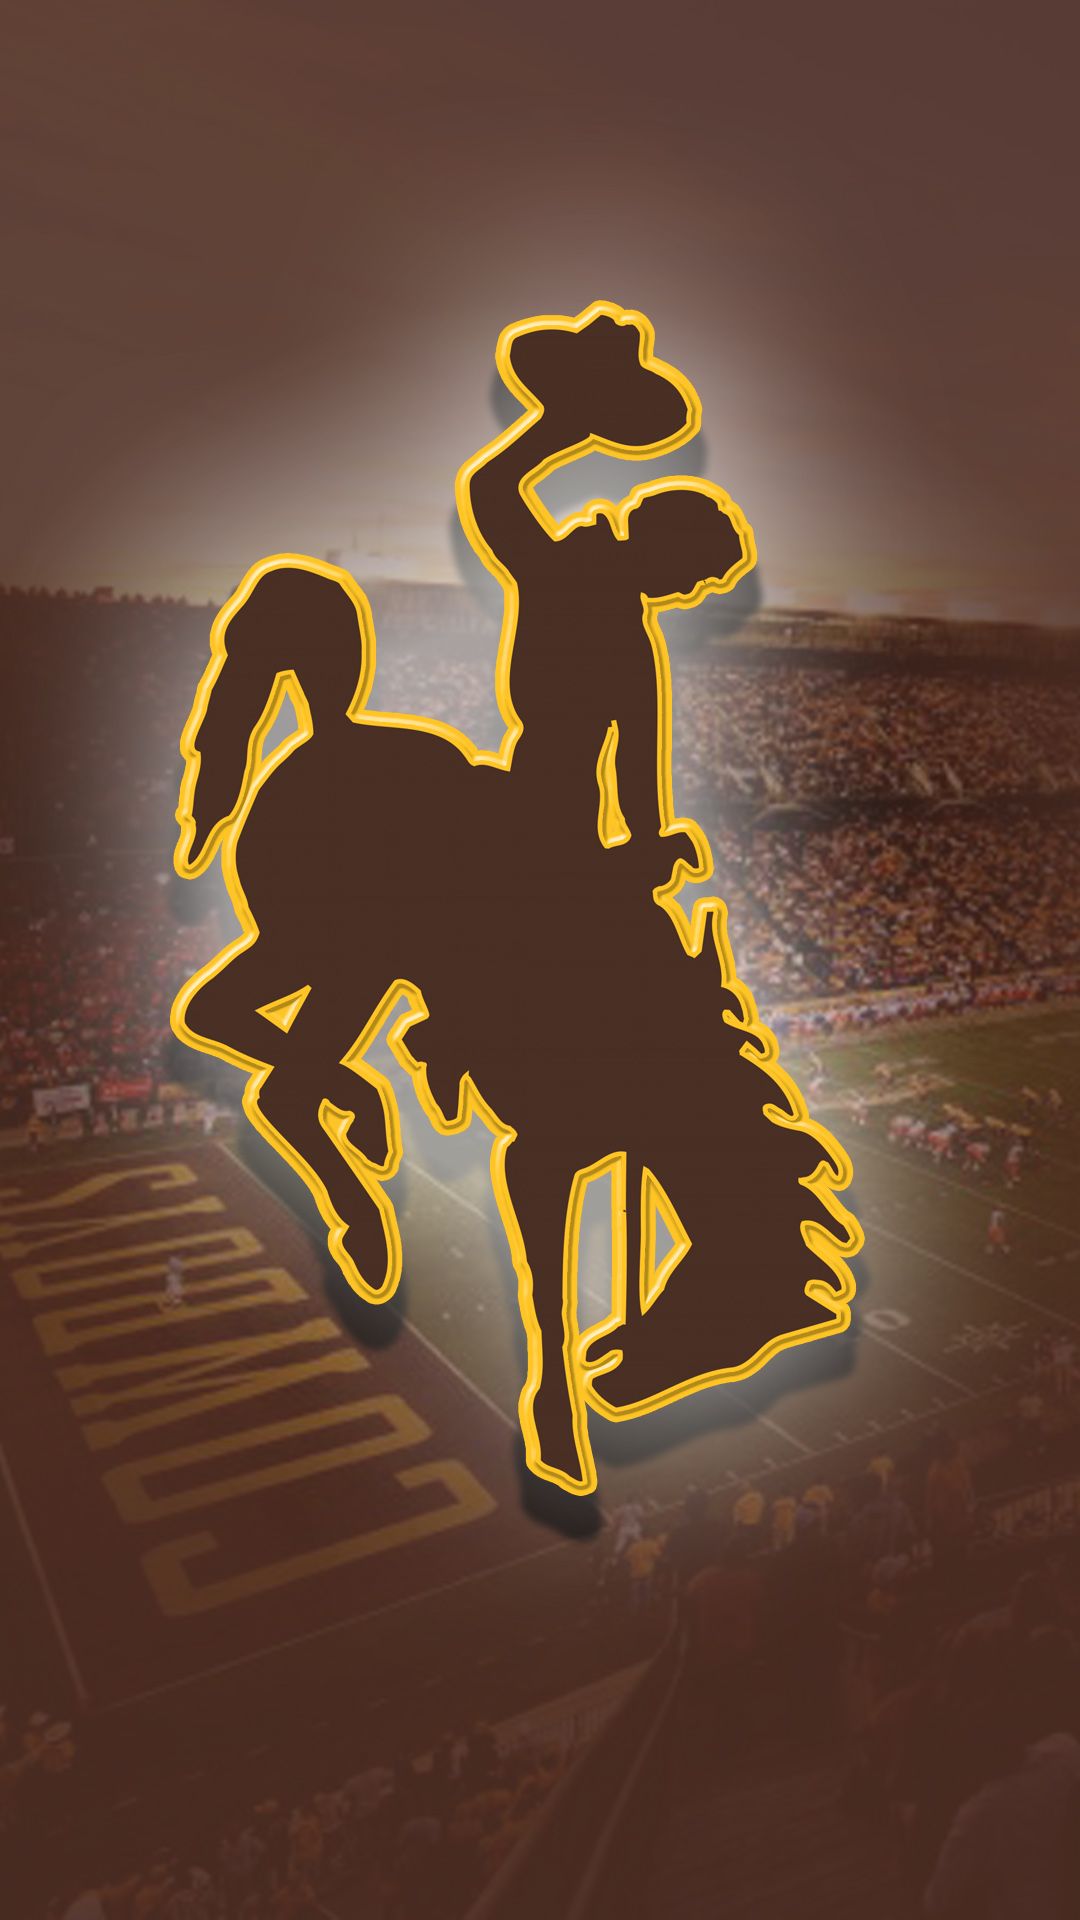 Cover Photo Wallpaper Ideas. Wyoming Cowboys, Wyoming, Photo Wallpaper